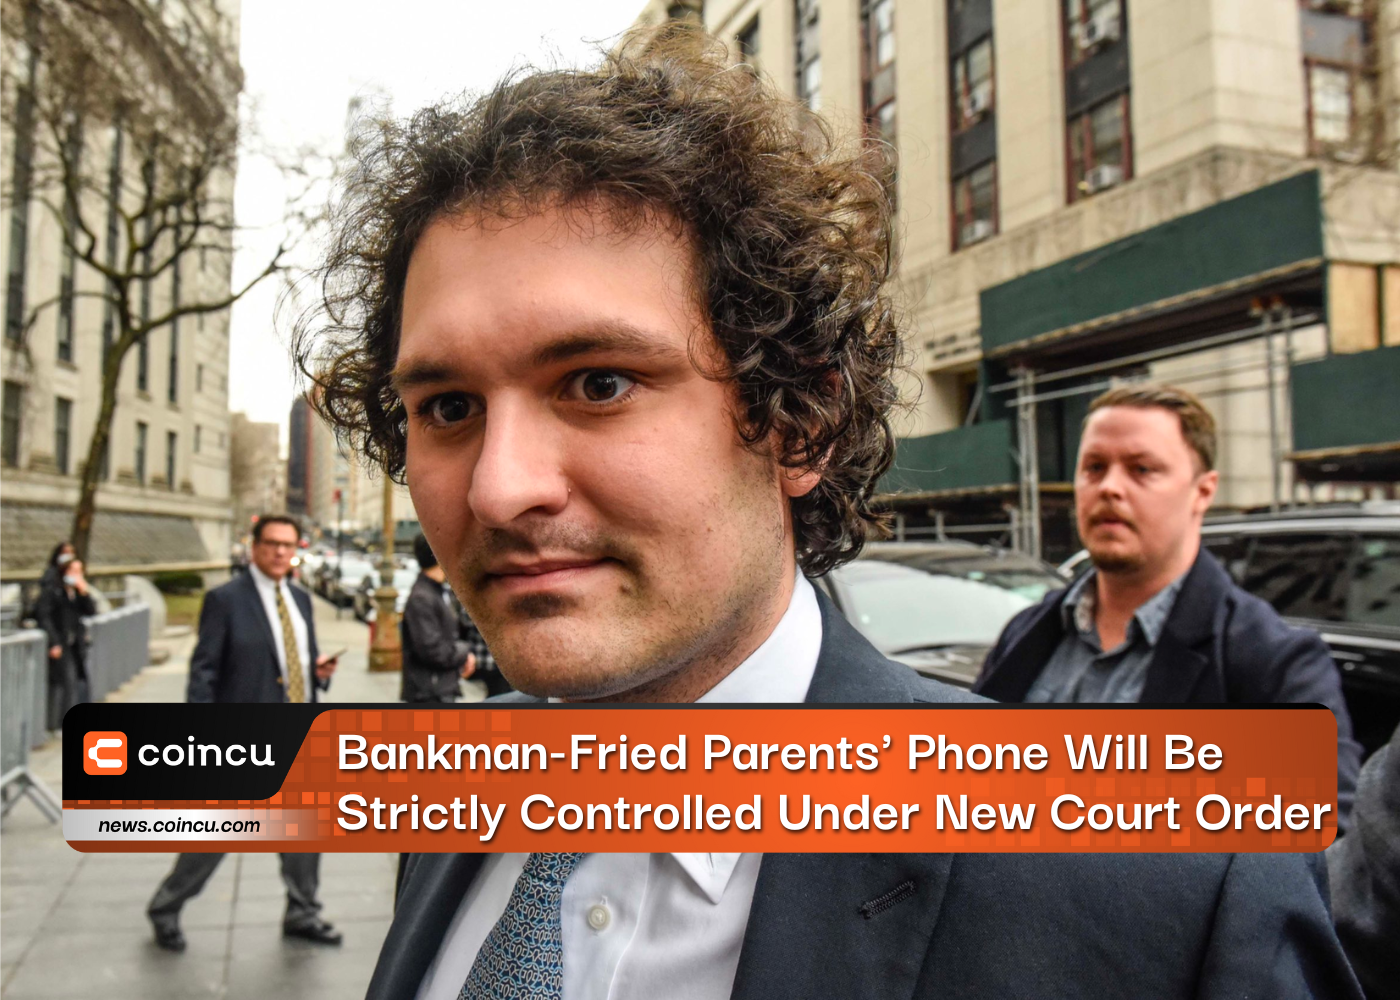 Bankman-Fried Parents' Phone Will Be Strictly Controlled Under New Court Order